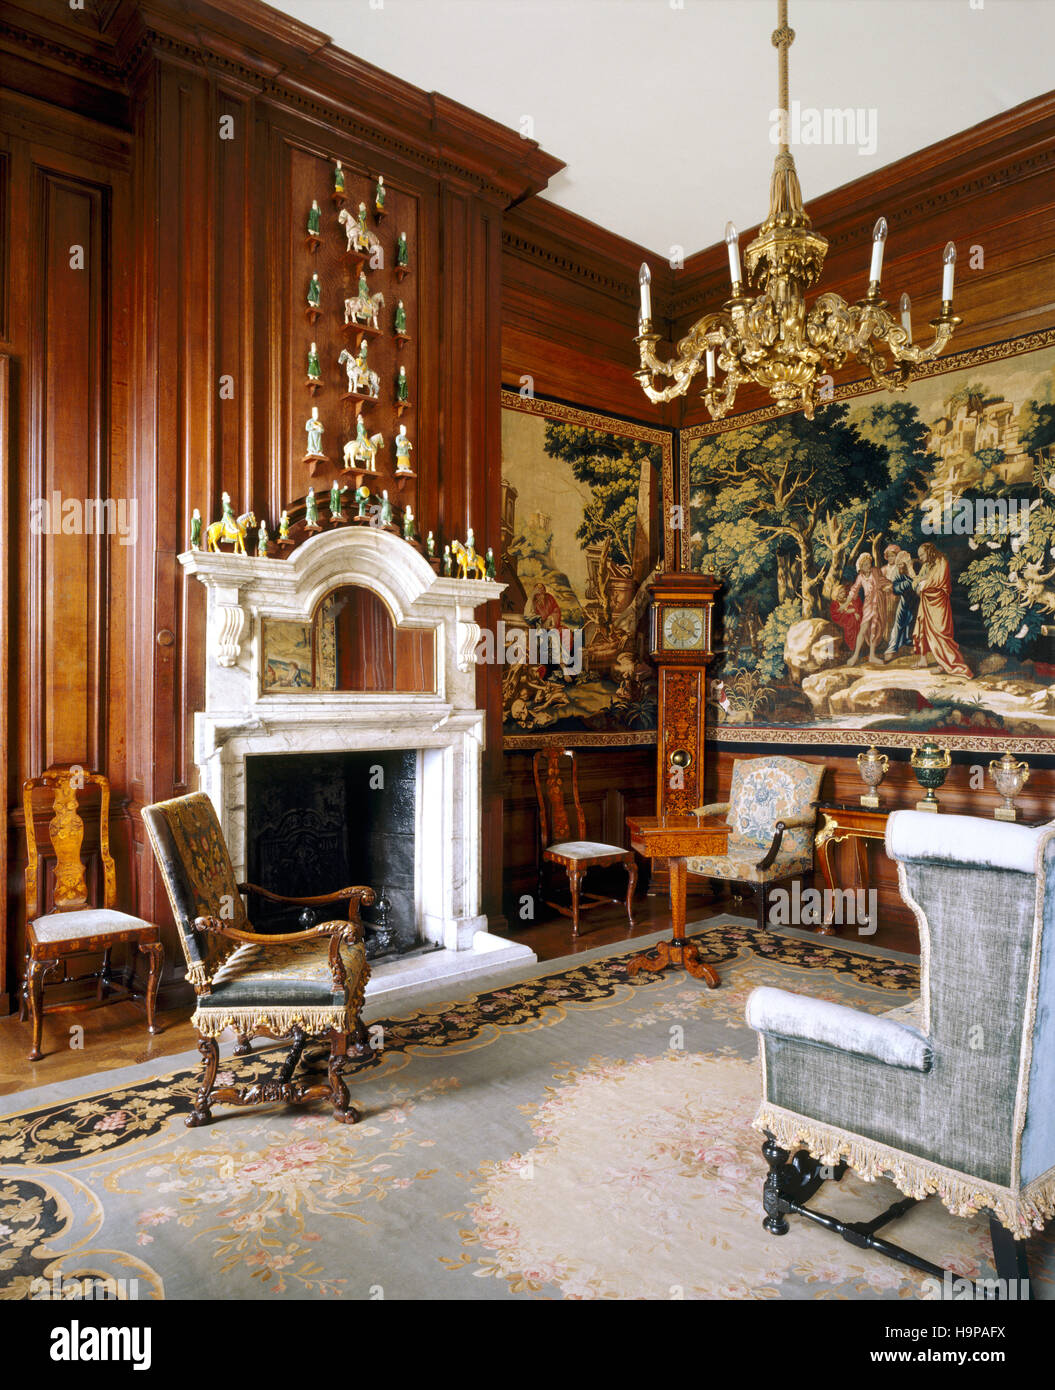 View of the Tapestry room at Antony House showing smoky grey marble chimney-piece, late C17th style settee with oak frame, Stock Photo